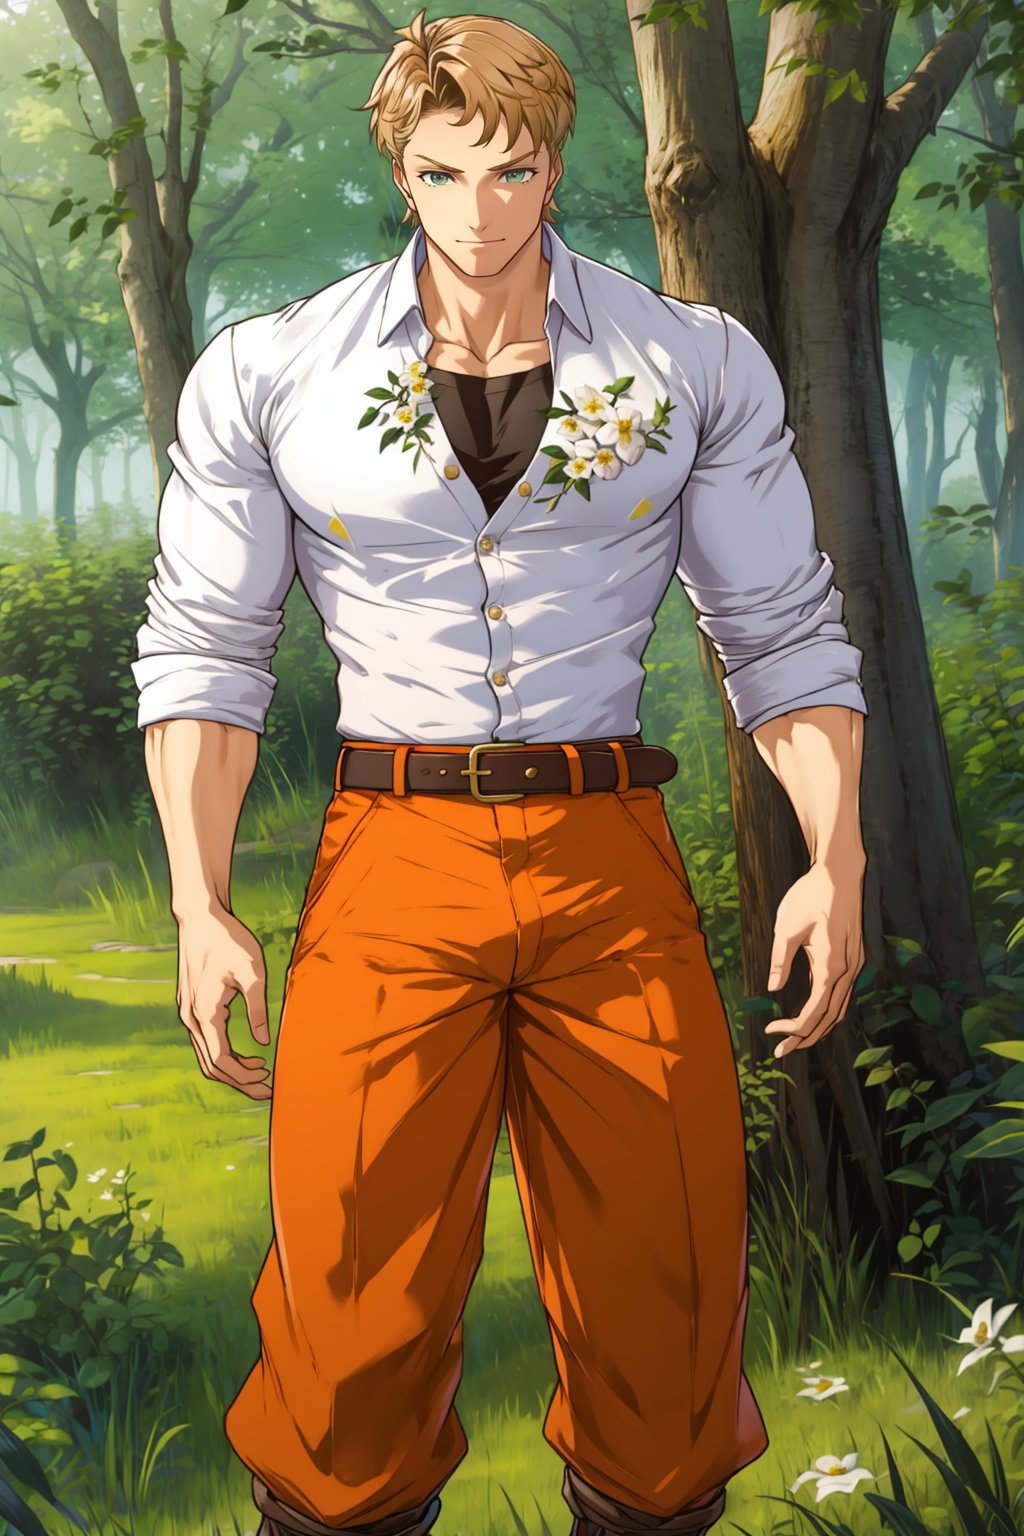 Boucheron,  photorealistic,  Undershirt,  Masterpiece,  High Quality,  Man,  White Shirt,  Gold Flowers on Shirt,  Belt,  Orange Pants, knees in frame, Grassy Plains,  Thick Oak Trees Everywhere,  Pale leaves fluttering in the wind,  Muscular,  Broad Shoulders,  Large Biceps,  Masculine,  Great Lighting,  Huge Pectorals,  Large Crotch, Manly, Adult Male